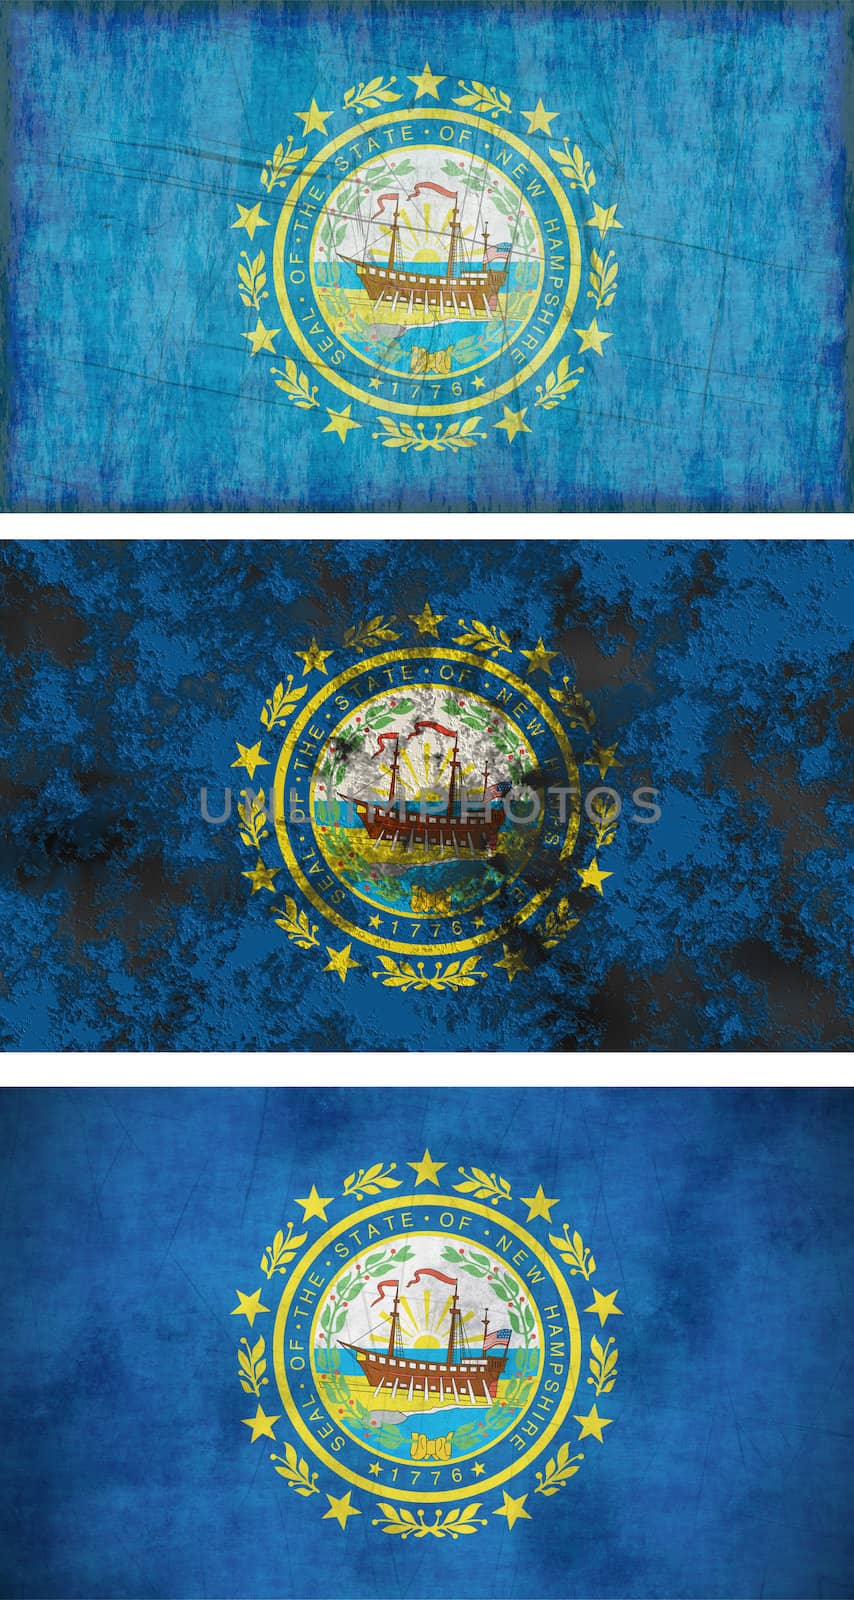 Great Image of the Flag of New Hampshire